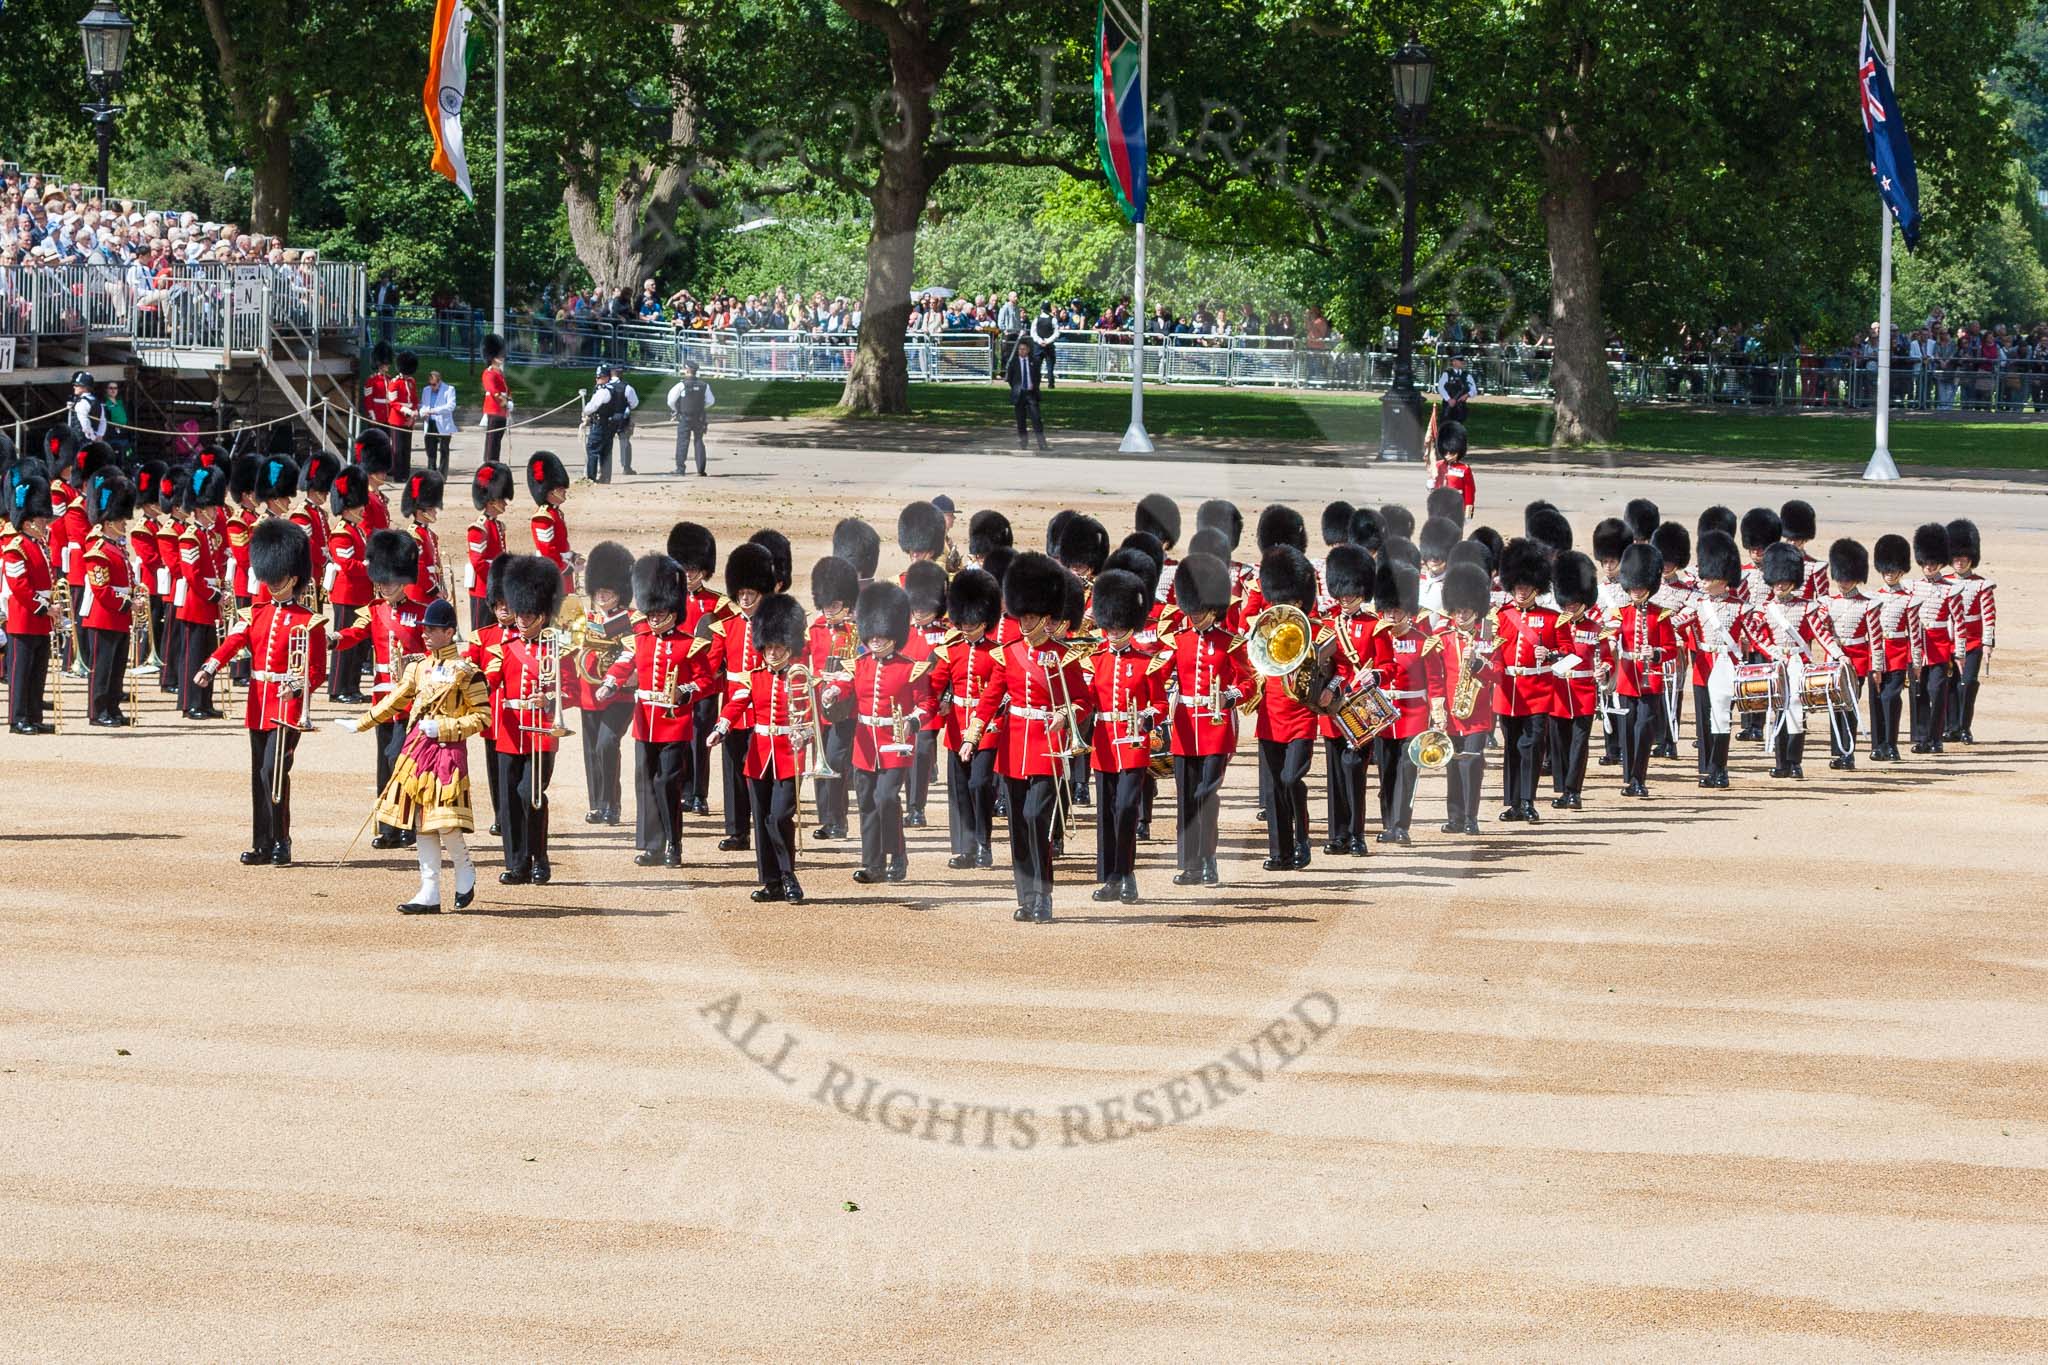 The Colonel's Review 2015.
Horse Guards Parade, Westminster,
London,

United Kingdom,
on 06 June 2015 at 10:29, image #78